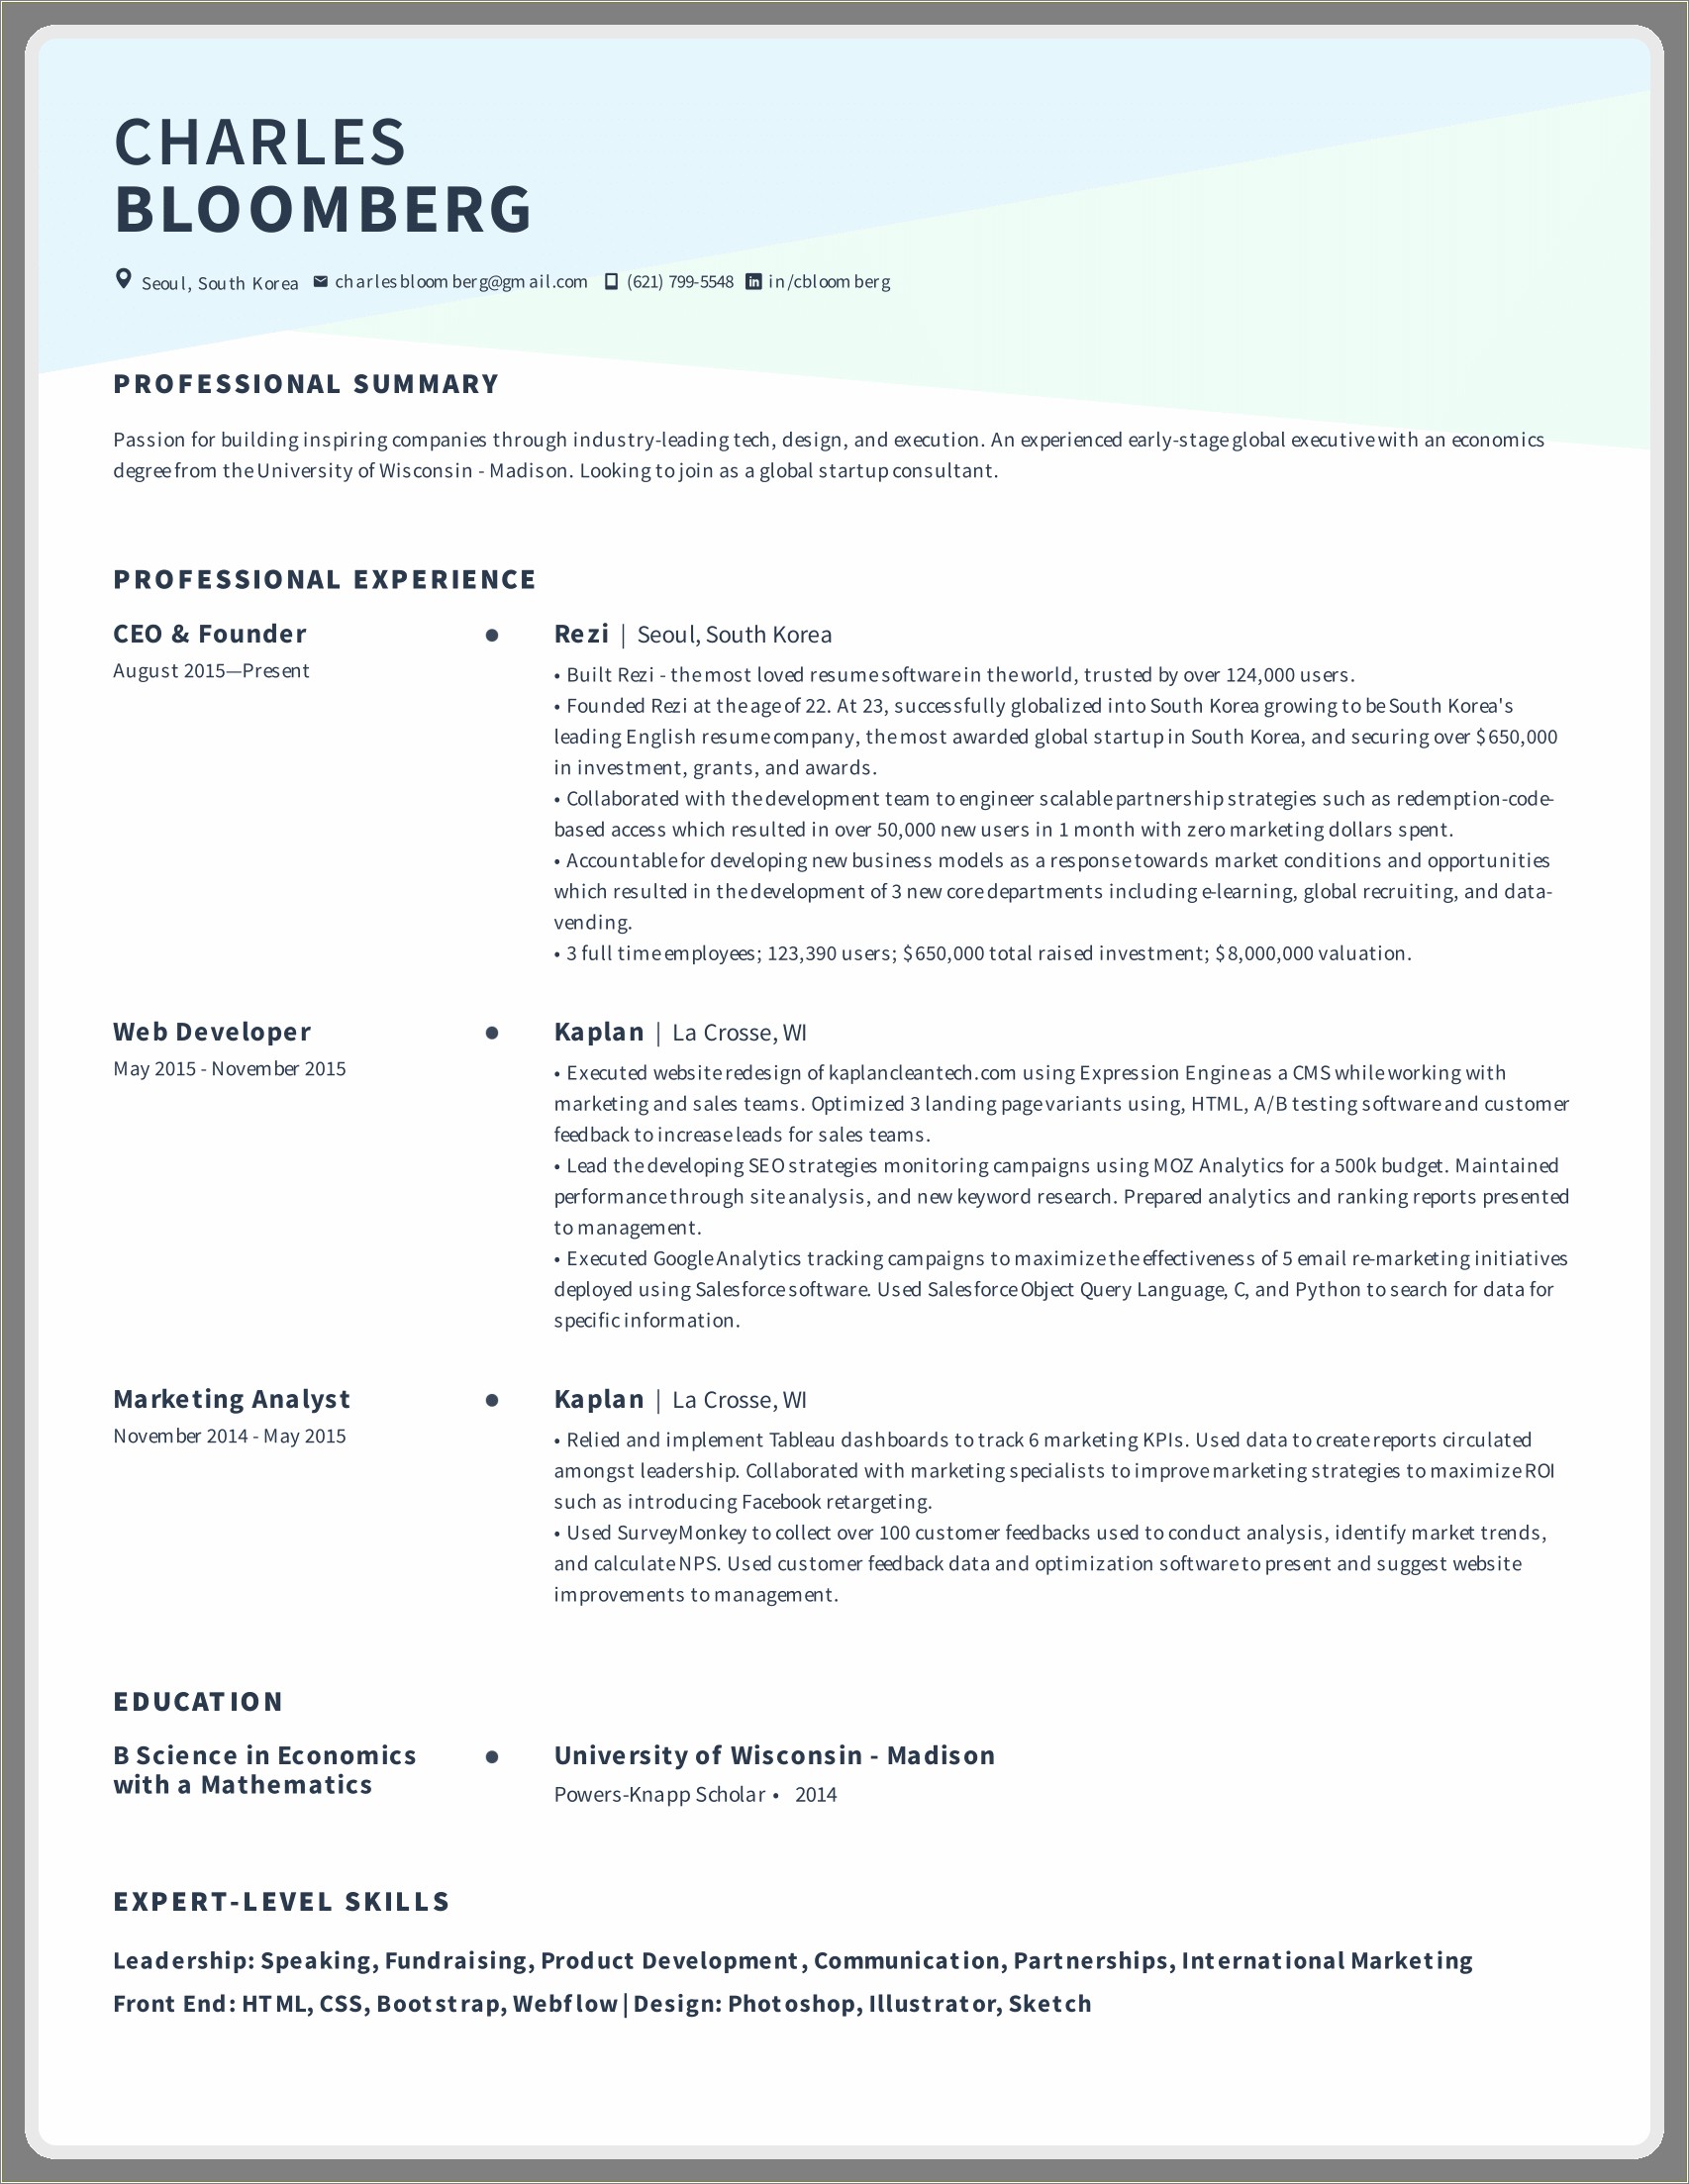 Applicant Tracking System It Resume Template